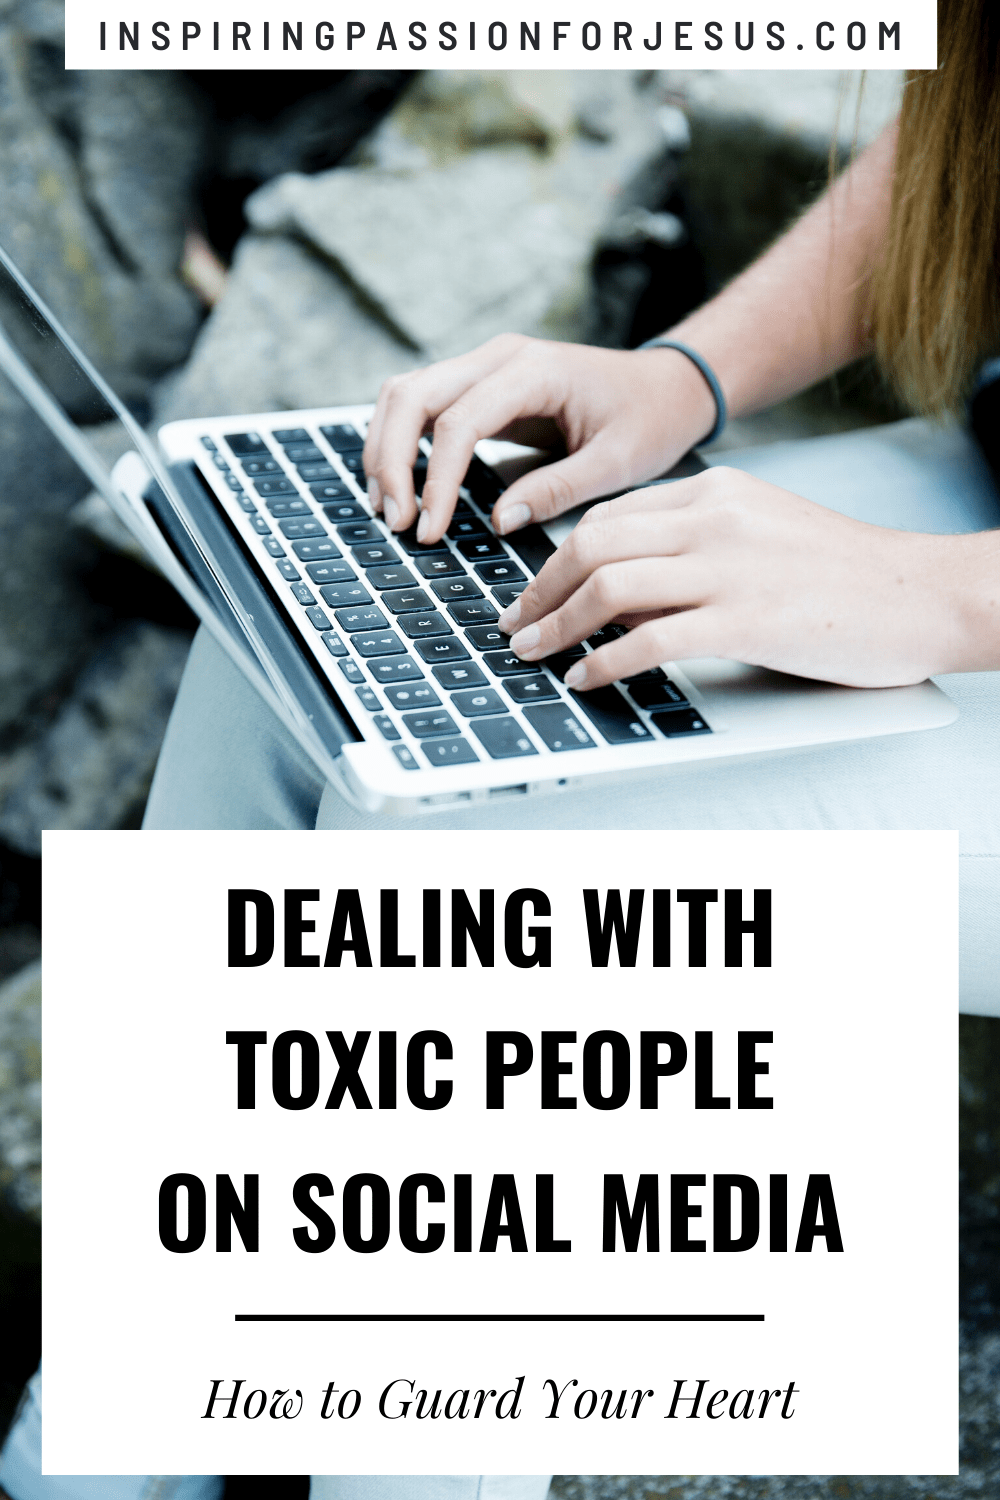 Dealing with Toxic People on Social Media - How to Guard Your Heart